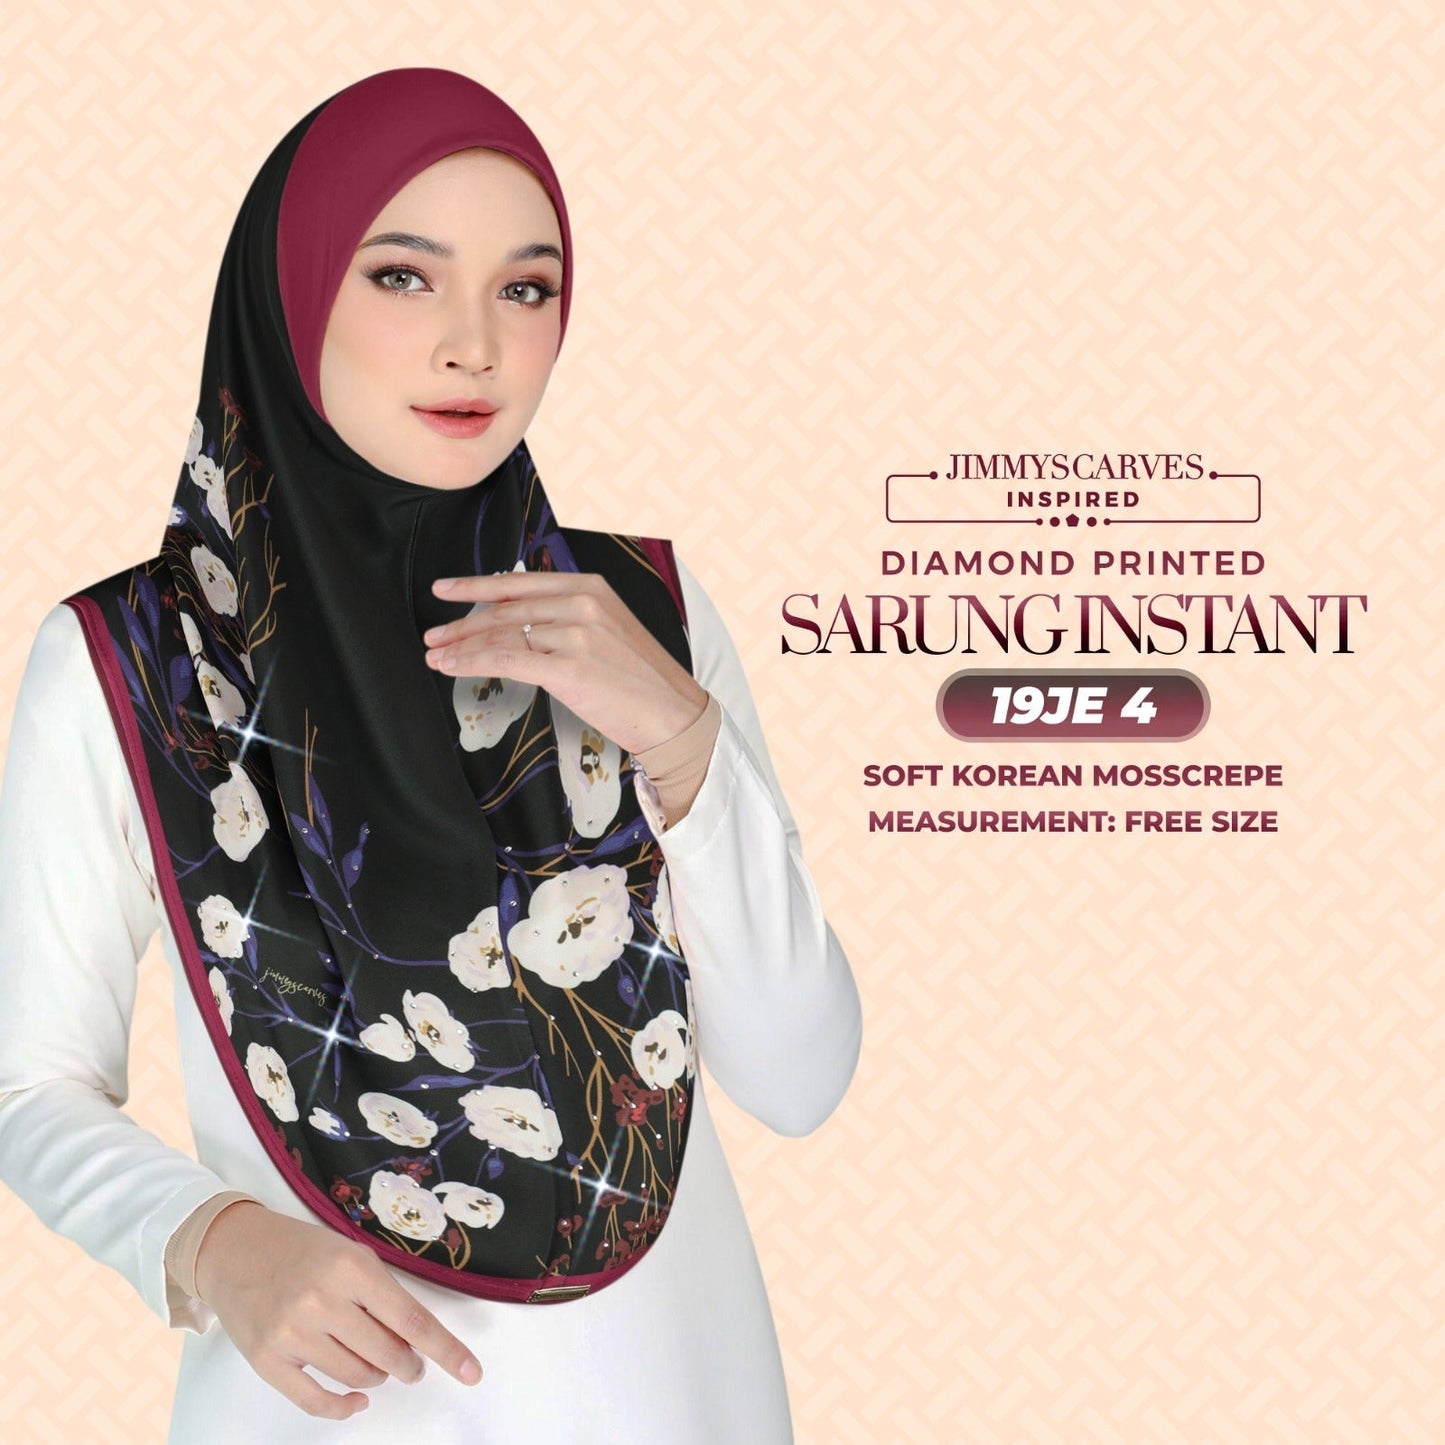 Jimmy Scarves Inspired - Instant Sarung Diamond Printed